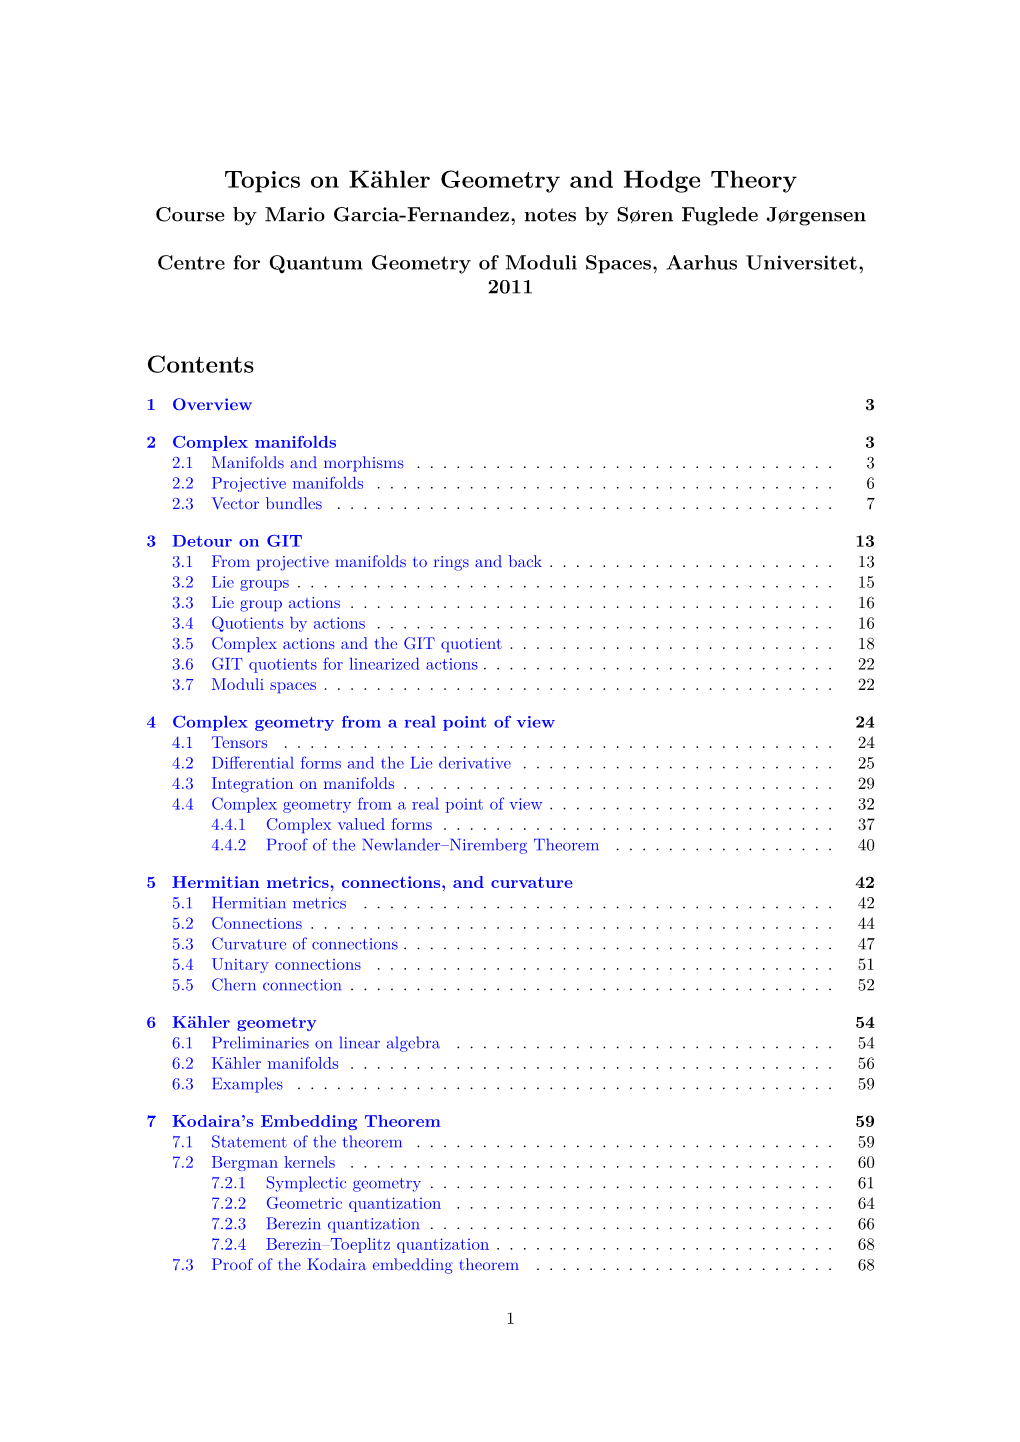 Topics on Kähler Geometry and Hodge Theory Contents